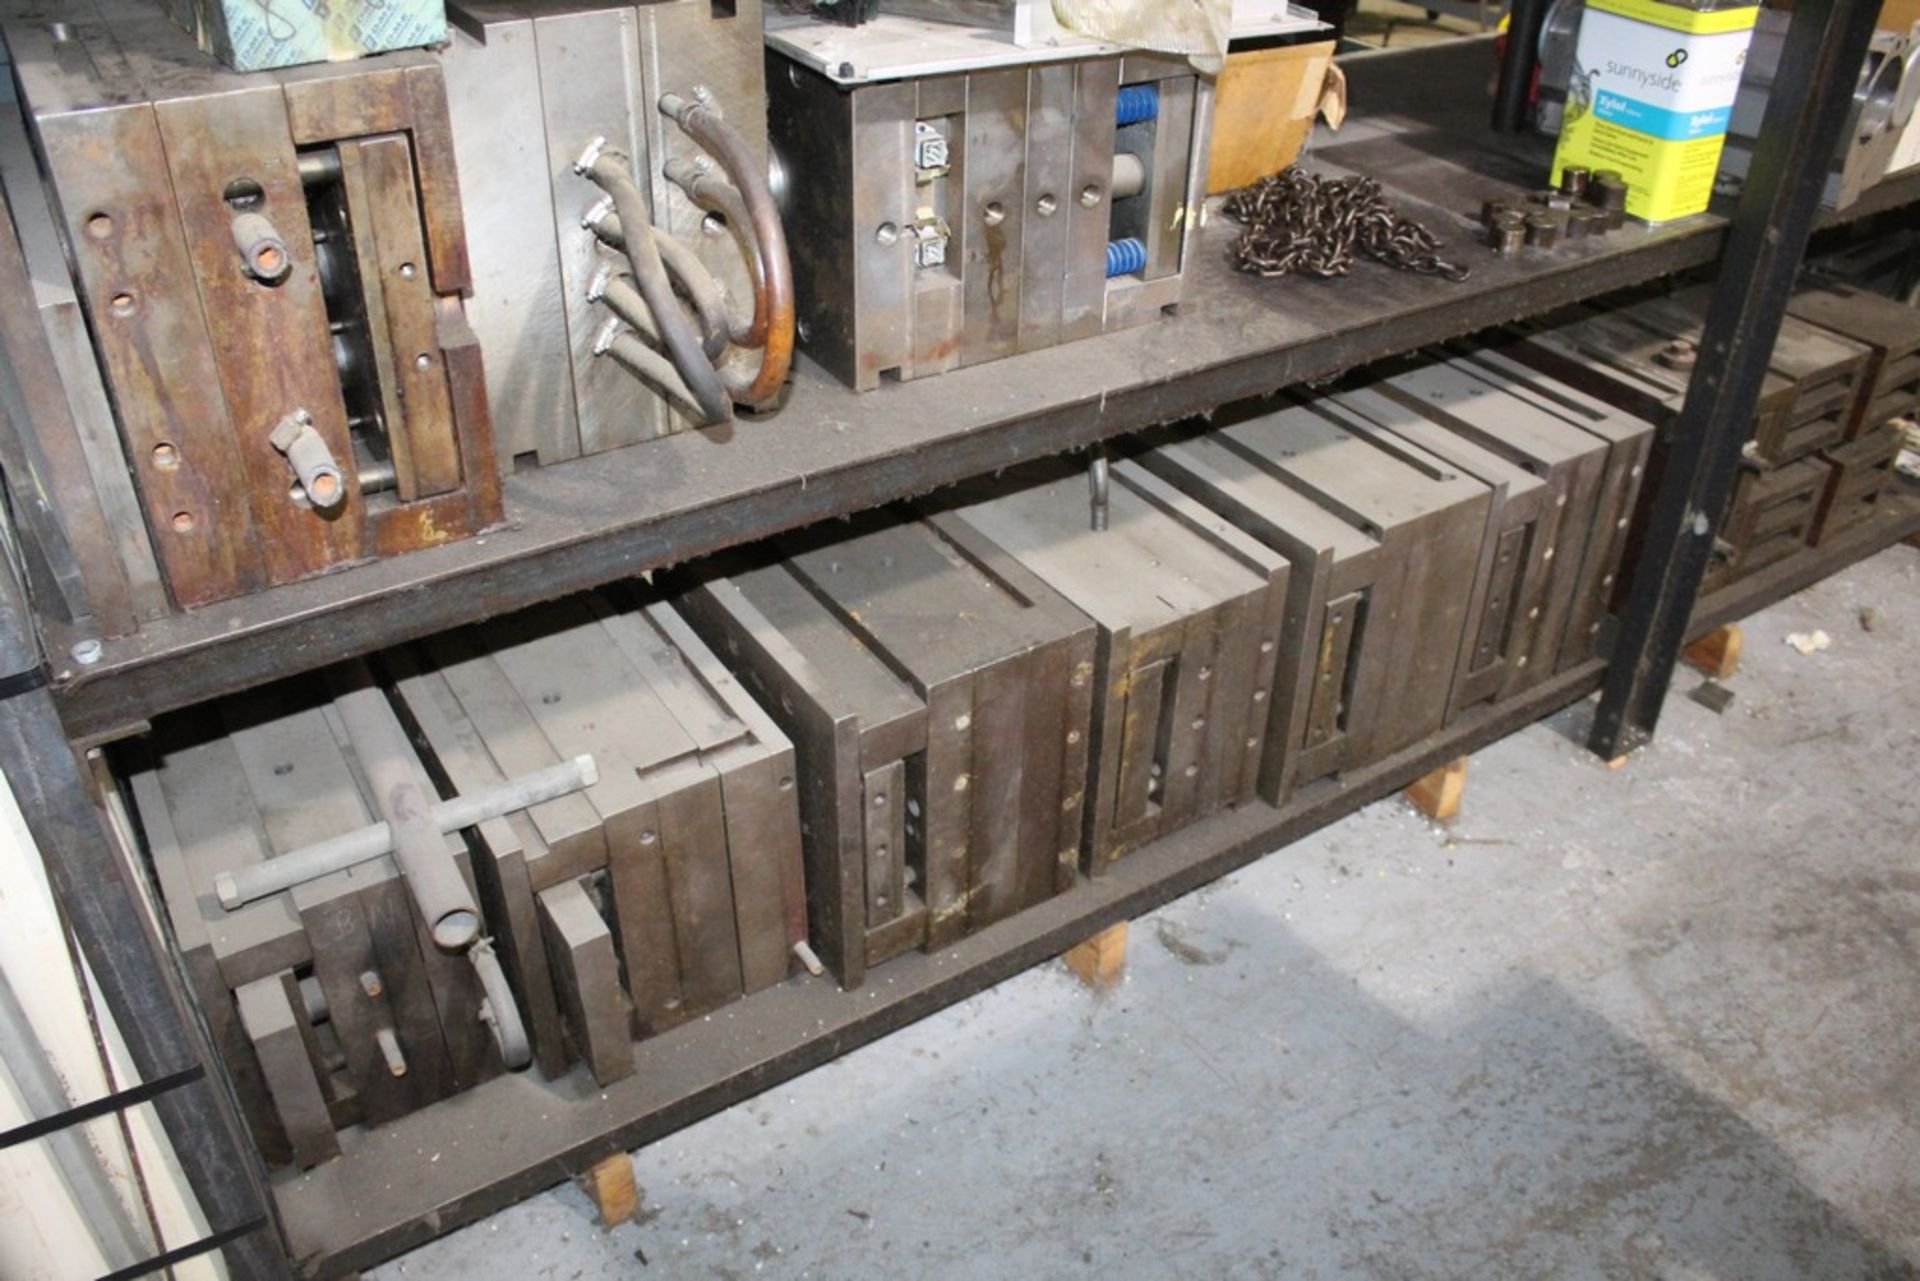 LARGE STEEL MOLD DIES AND ACCESSORIES ON (8) LOWER SHELVES - Image 4 of 6